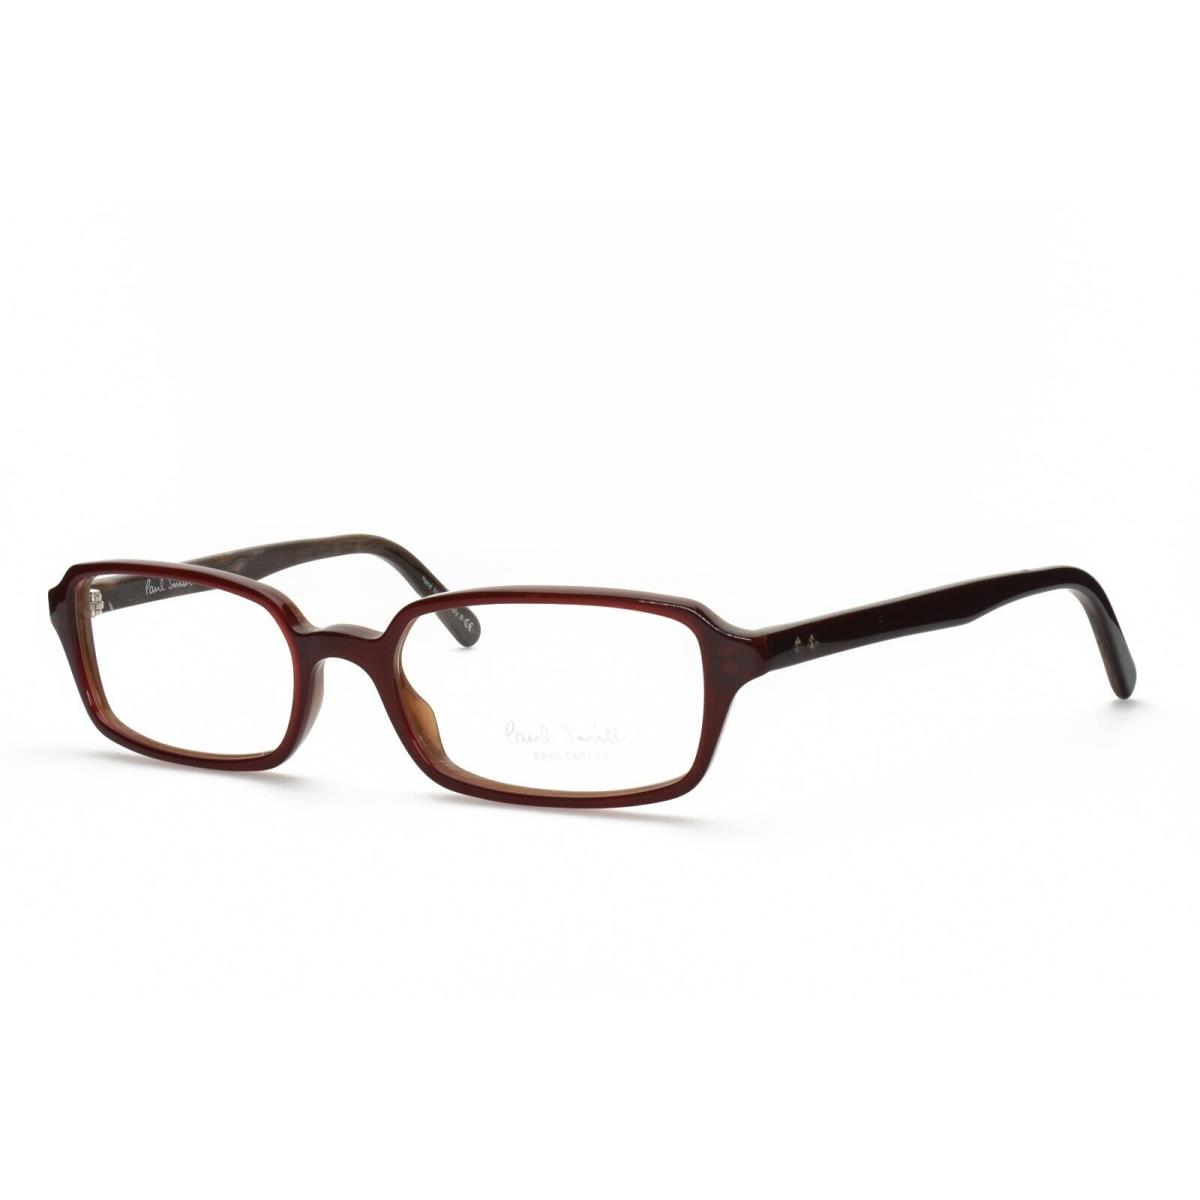 Paul Smith PS Wollaton 8078 1060 Eyeglasses Frames Only 50-17-140